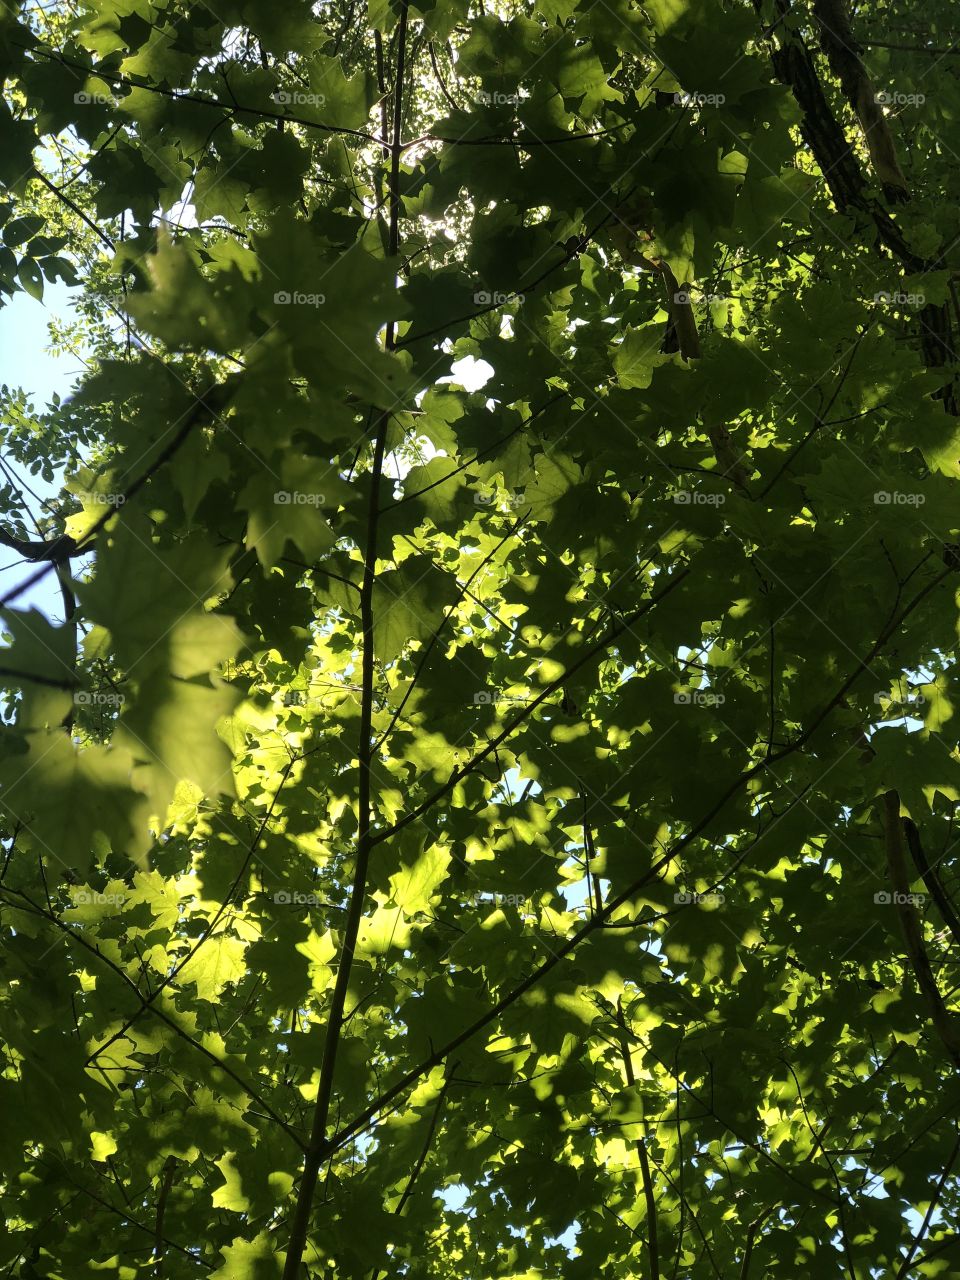 Sun shinning through beautiful tree top leaves during an outdoor nature walk in the forest 